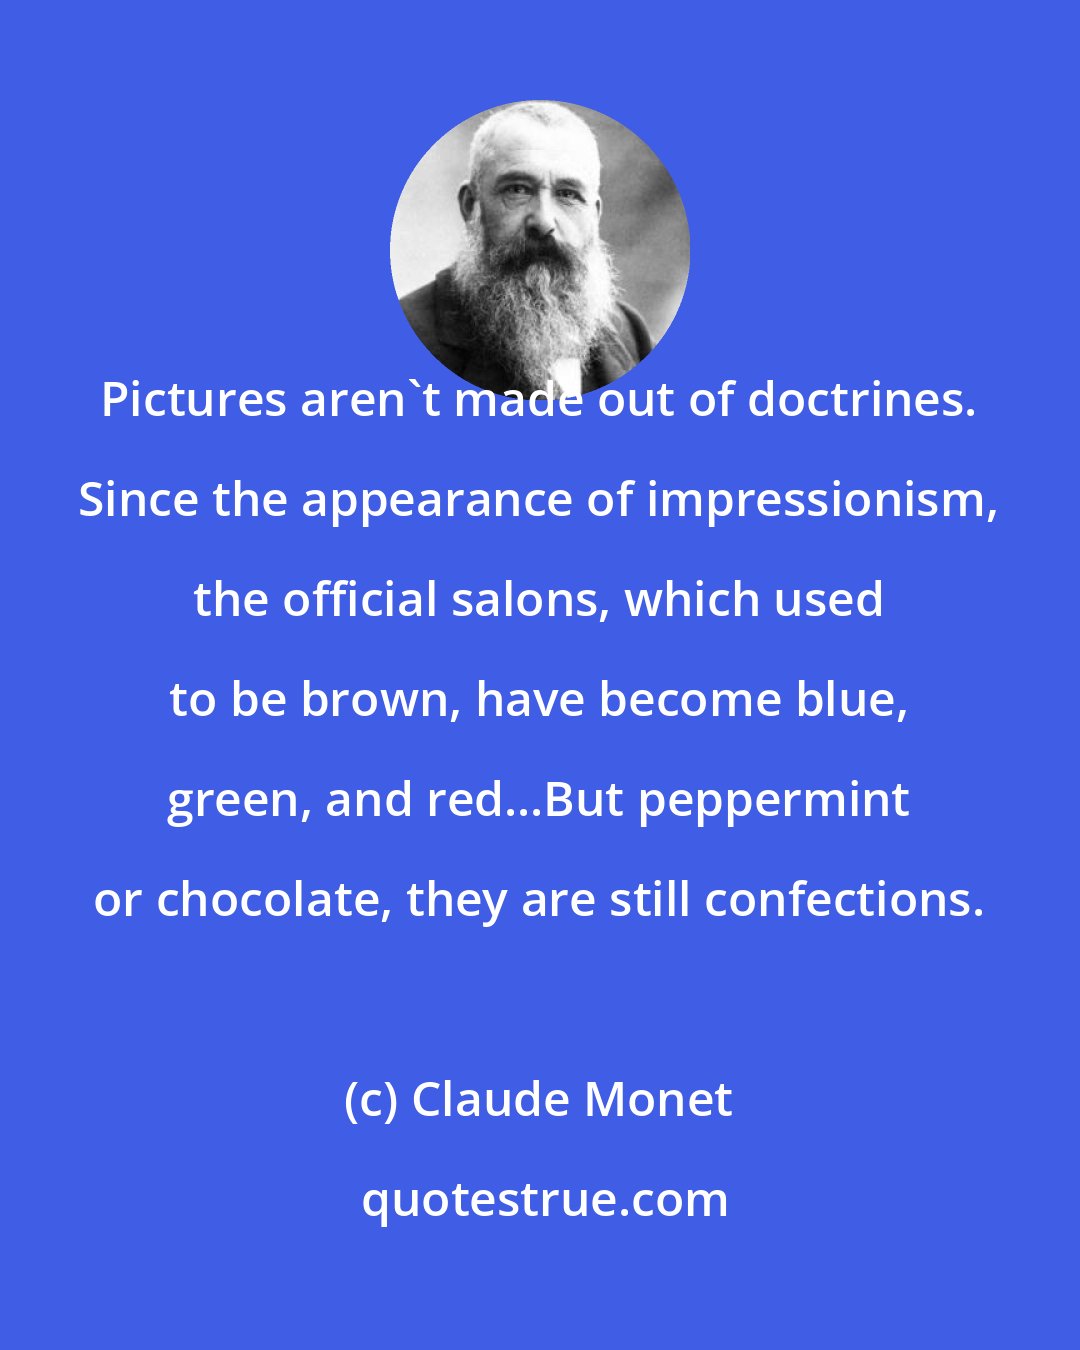 Claude Monet: Pictures aren't made out of doctrines. Since the appearance of impressionism, the official salons, which used to be brown, have become blue, green, and red...But peppermint or chocolate, they are still confections.